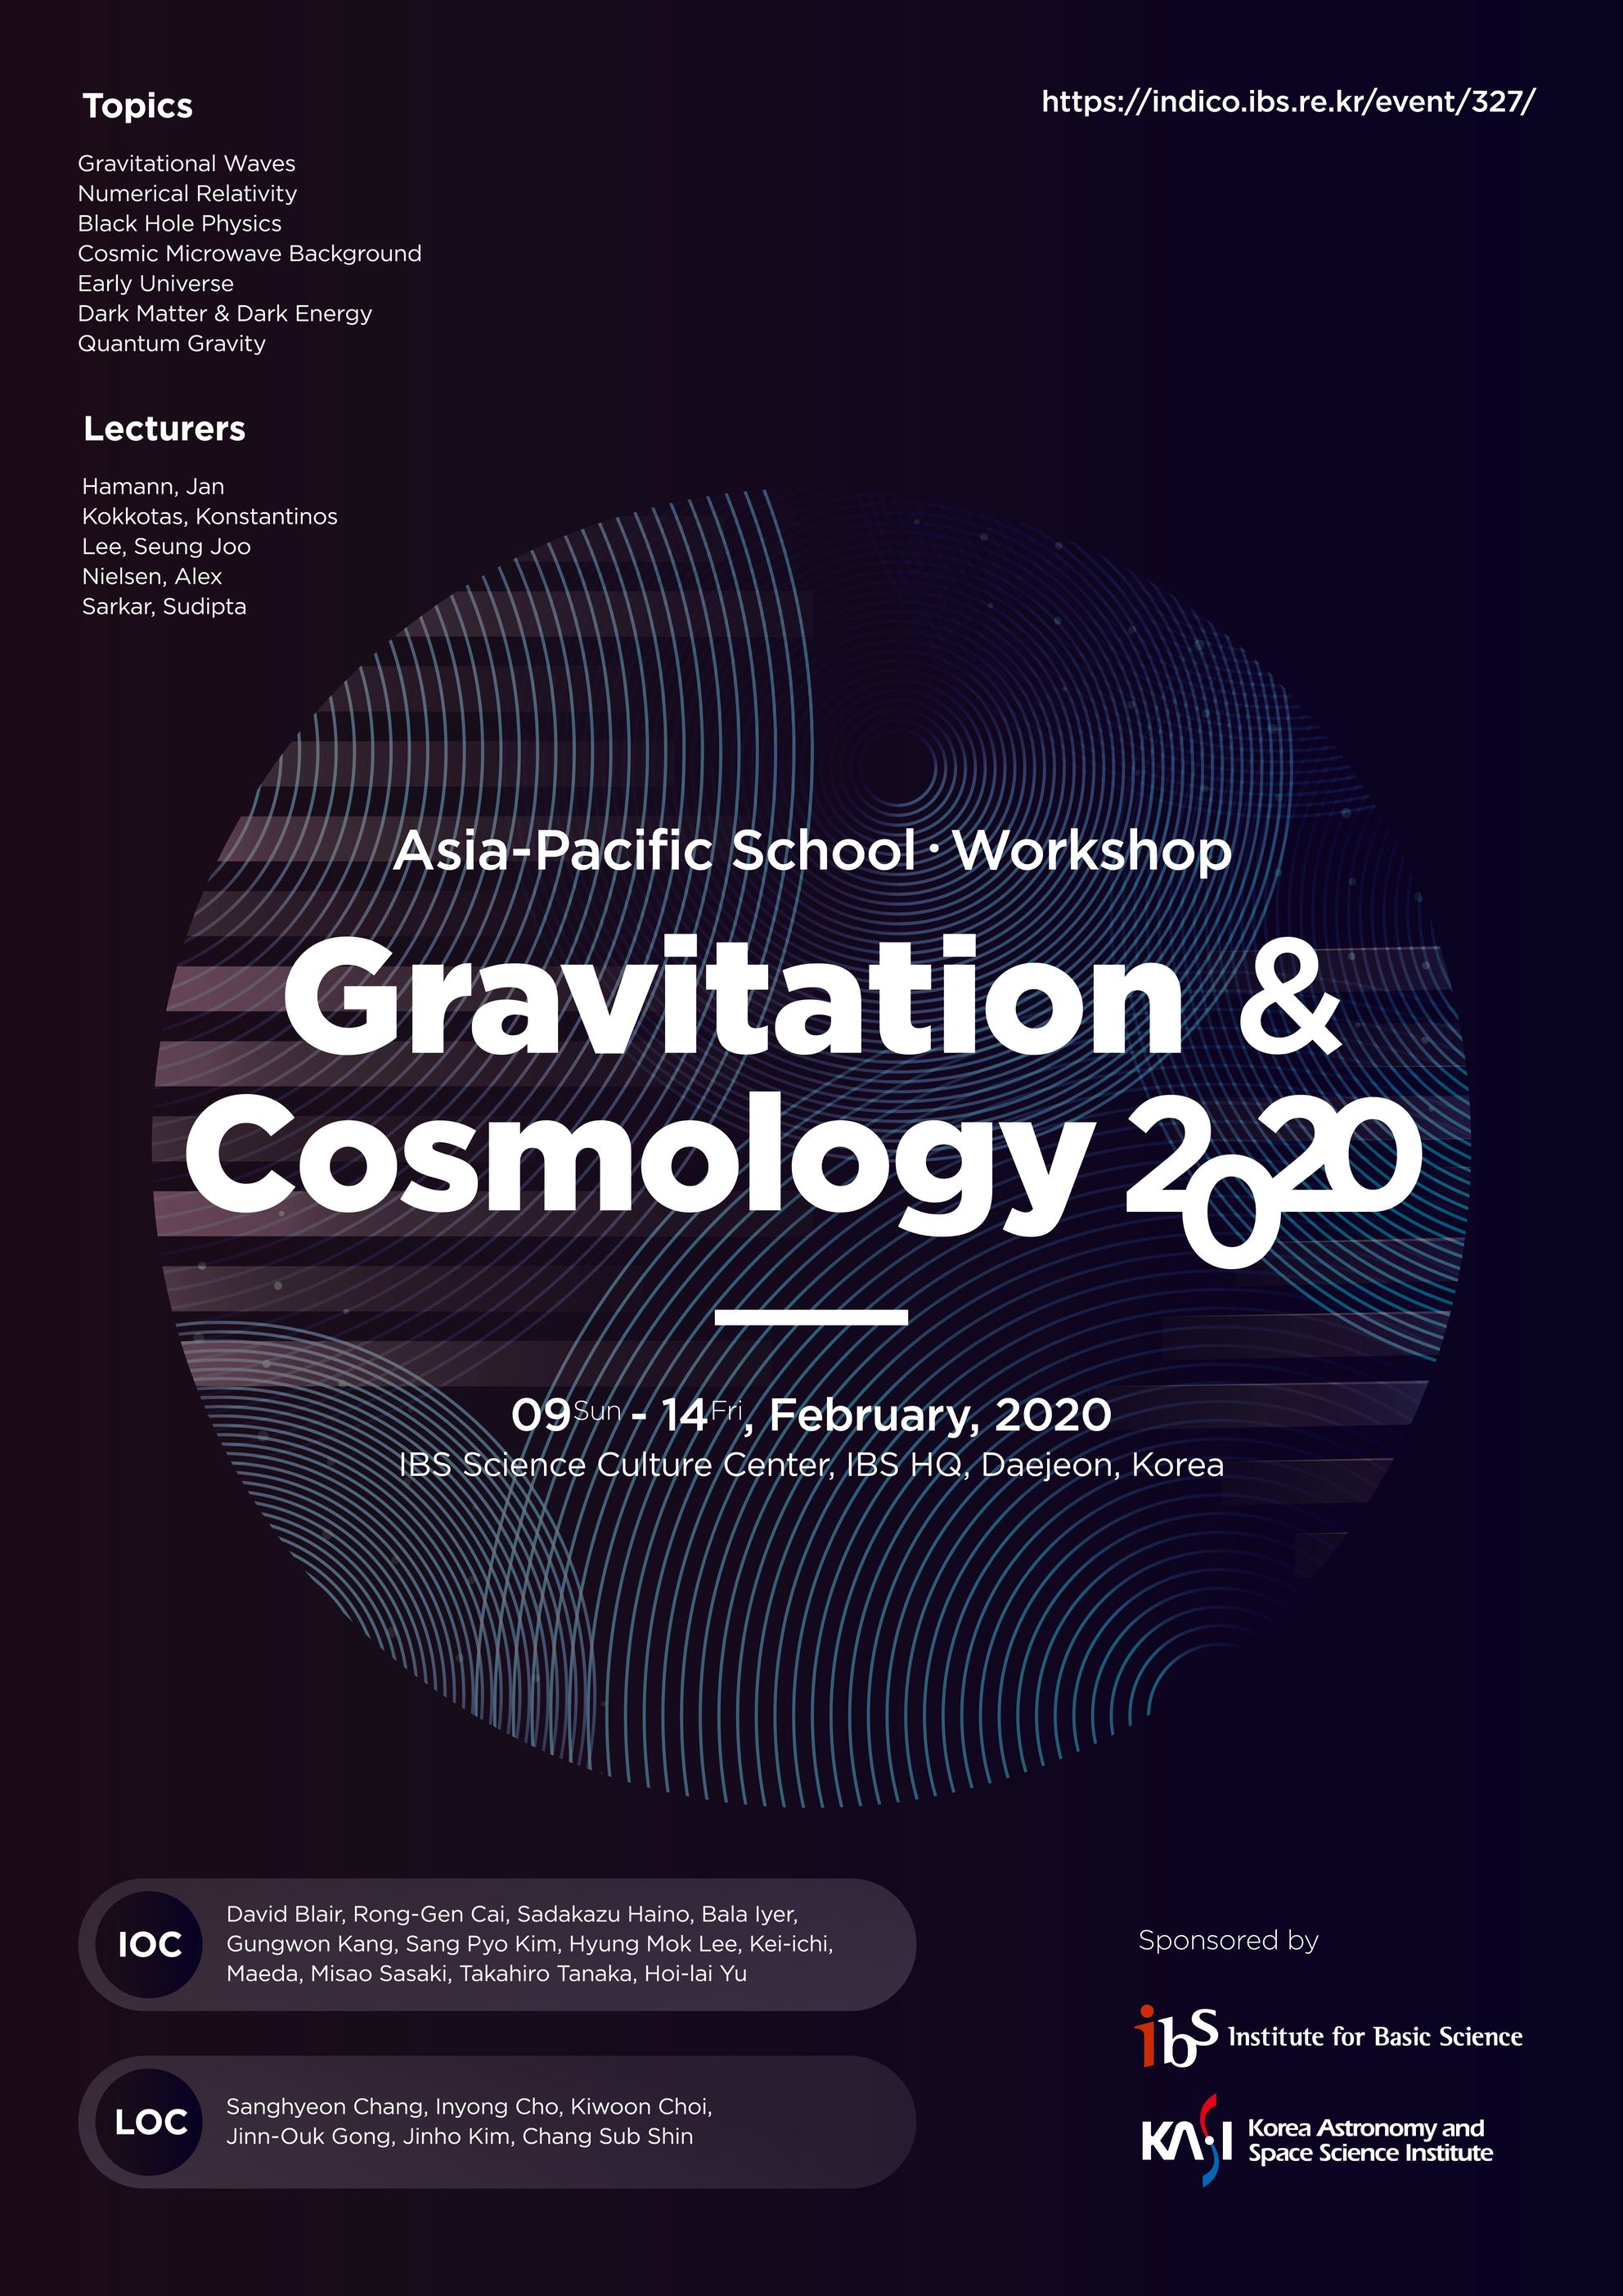 Asia-Pacific School and Workshop on Gravitation and Cosmology 2020